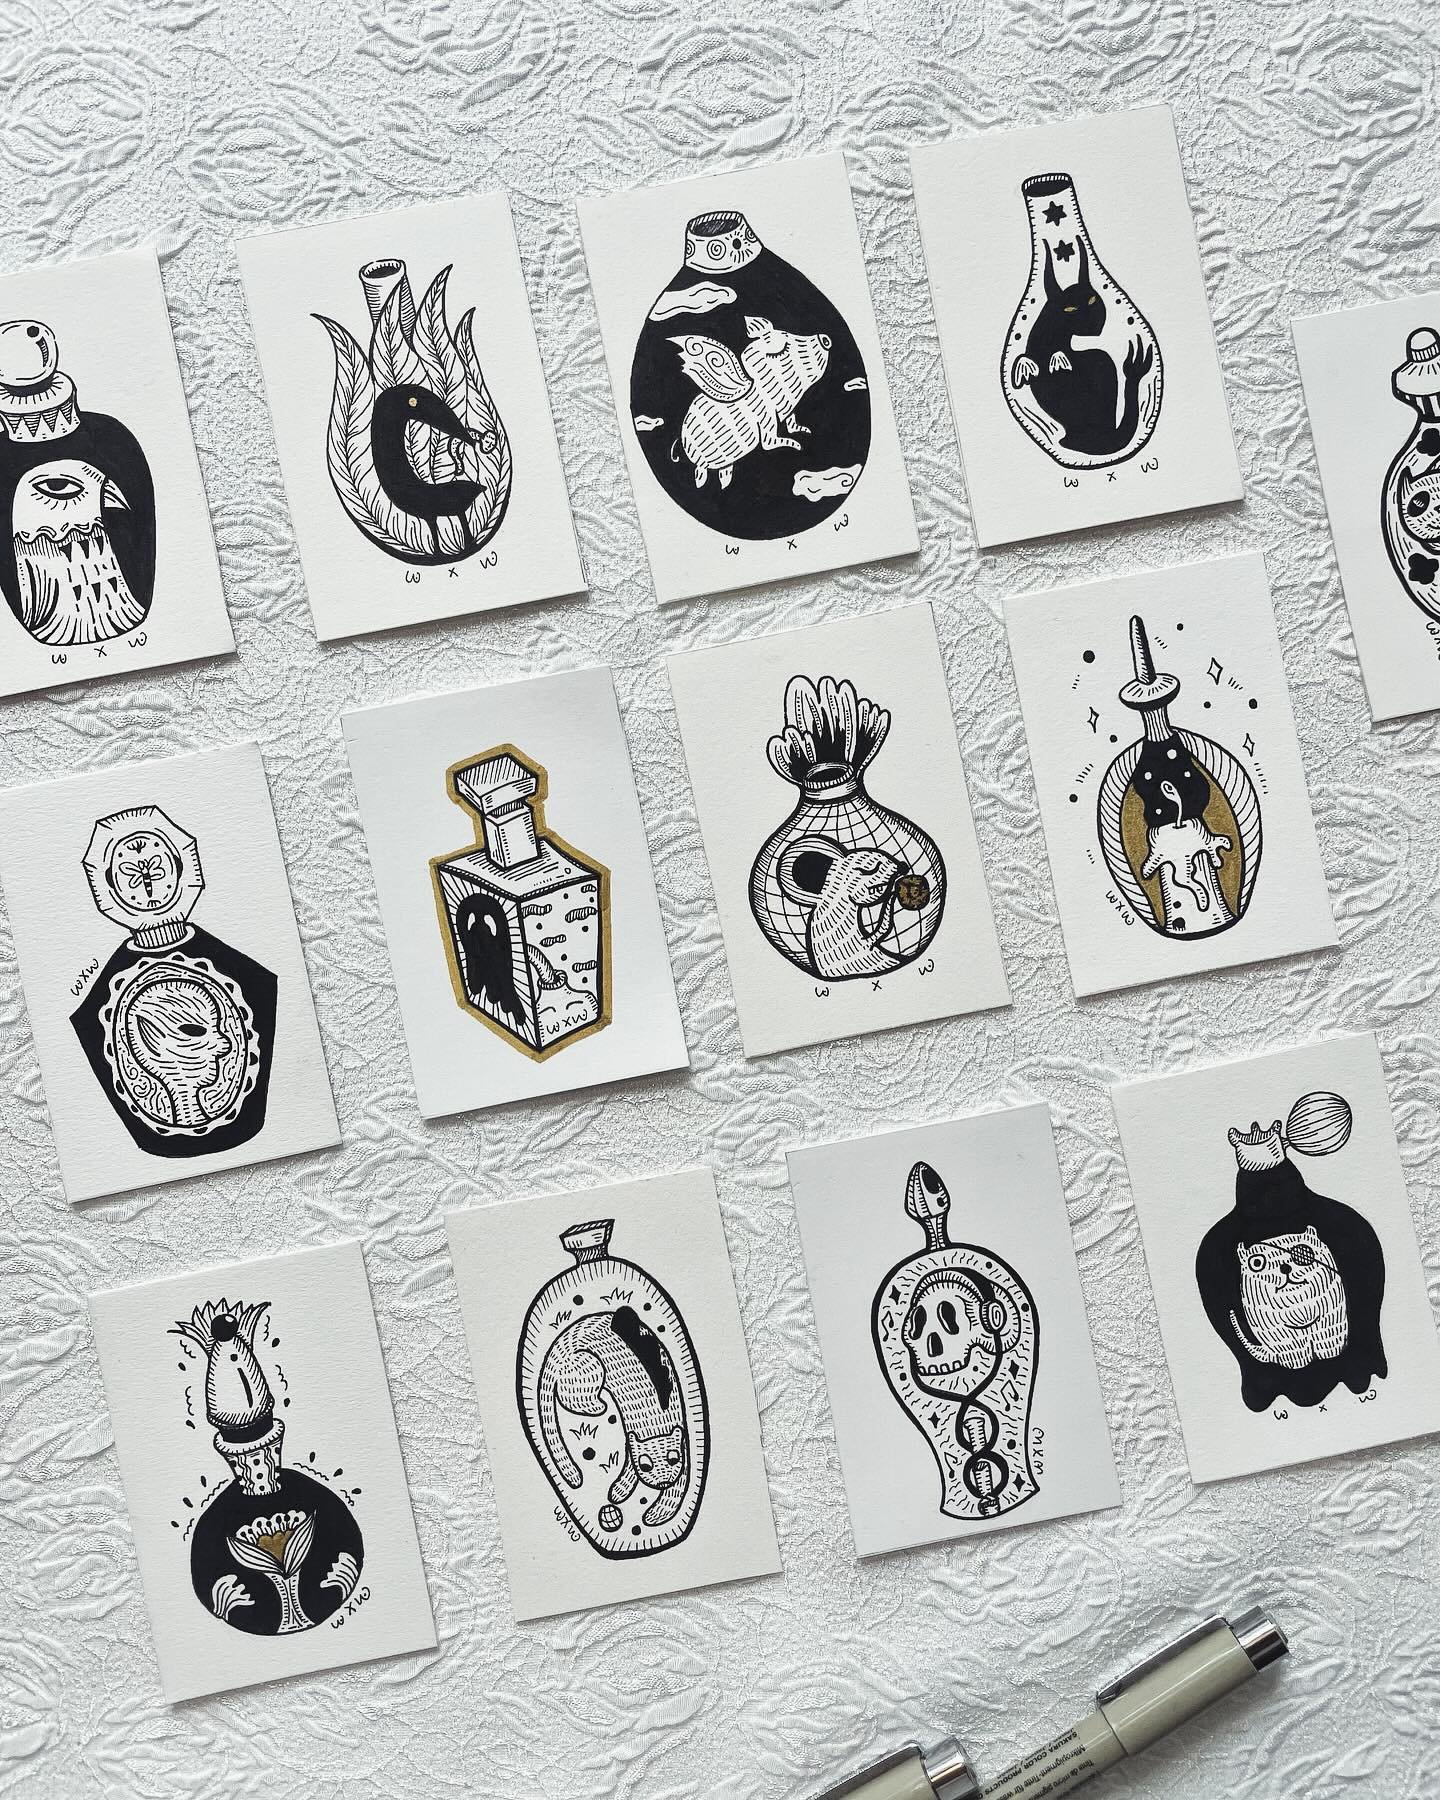 A lot of MiNi Captures are ready to frame 🖼️ 

2️⃣ Grumpy Raven Bottle 
3️⃣ Rock Till I Die Bottle
4️⃣ Chip Snatcher Bottle 
5️⃣ Dracula Bottle 
6️⃣ Big Black Bird Bottle
7️⃣ Fly To The Moon Bottle
8️⃣ Golden Cheese Bottle 
9️⃣ Candlelight In The Da